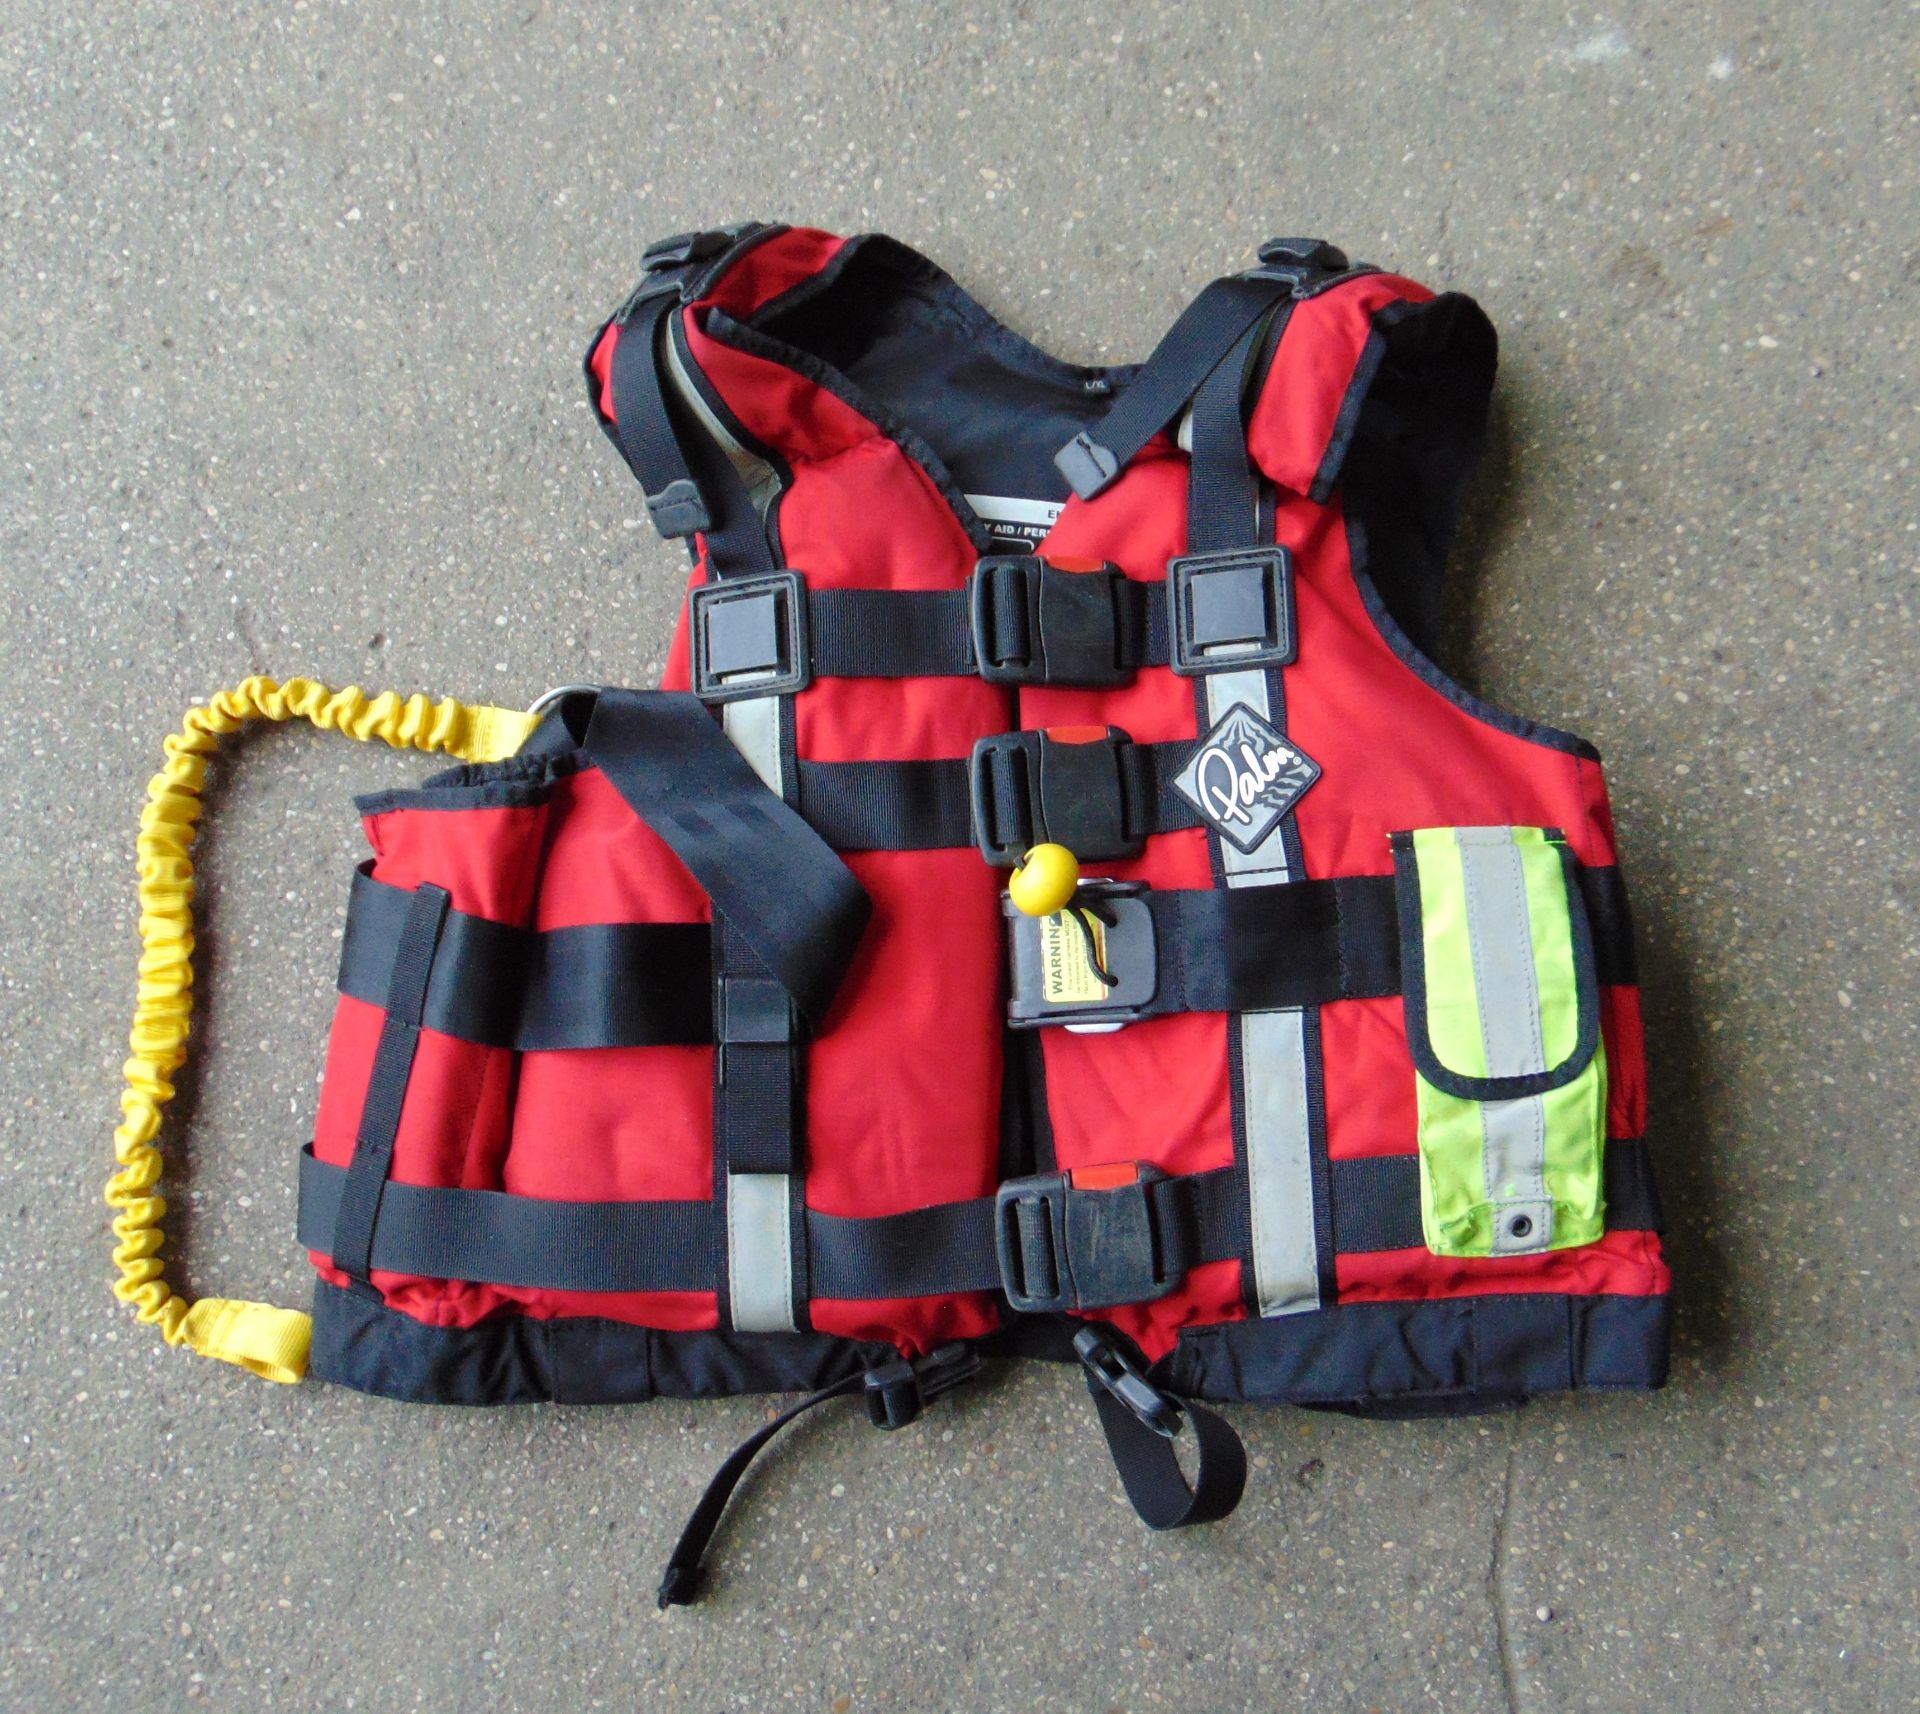 Palm Professional Rescue 800 Buoyancy Aid - PFD Personal Floatation Device Size L/XL - Image 2 of 4